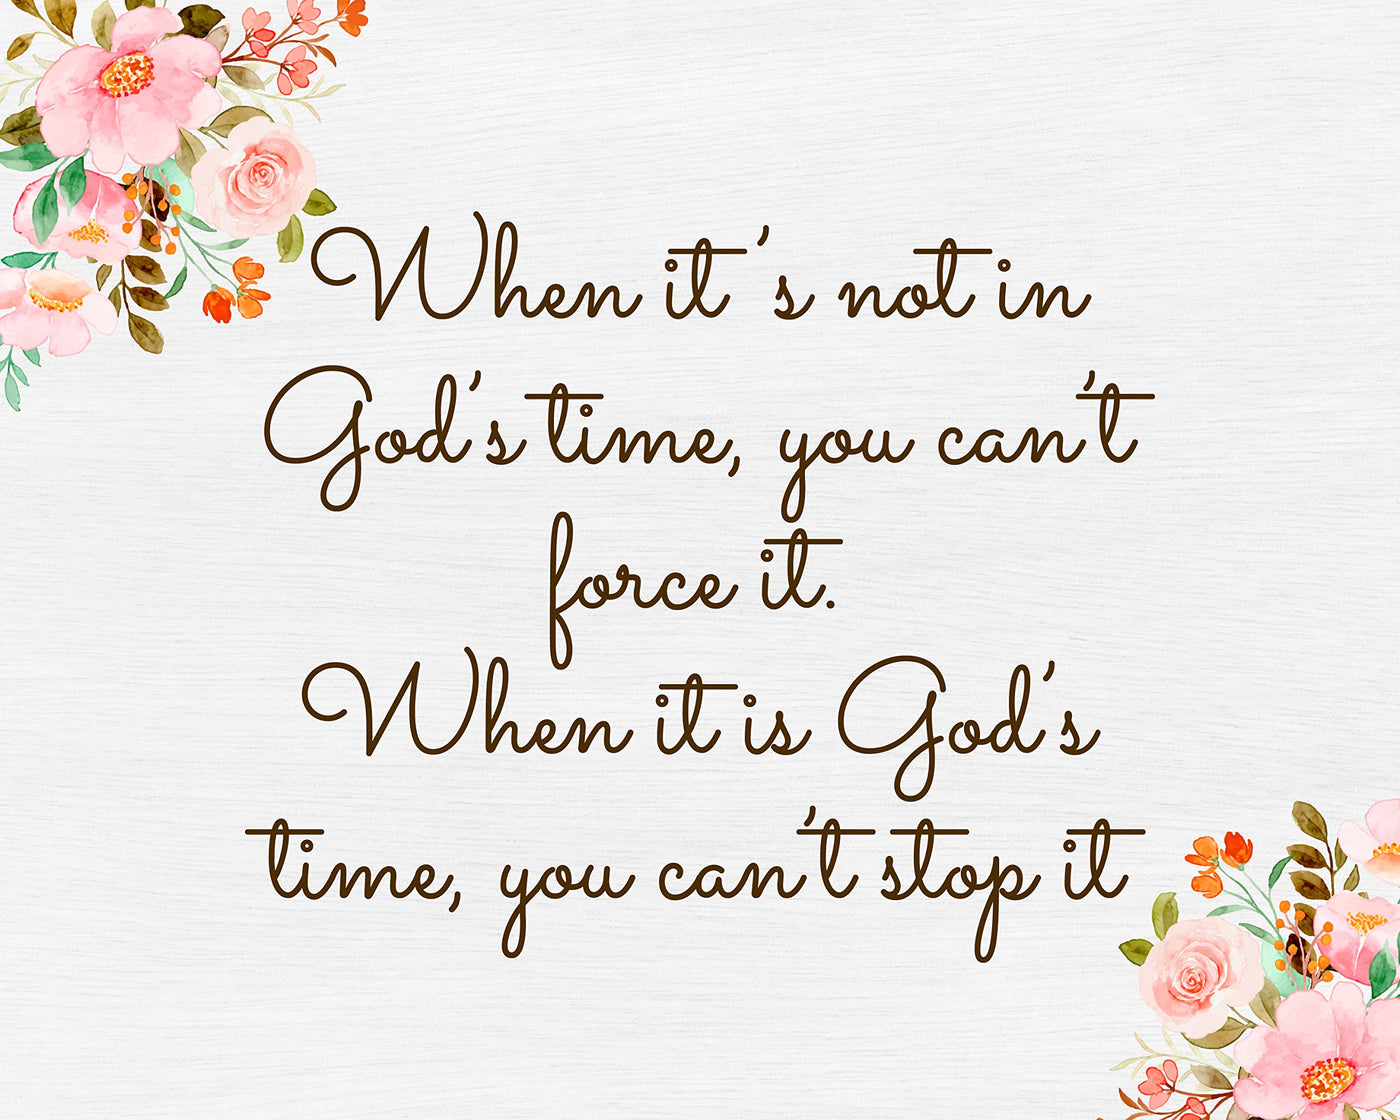 Can't Stop It When It Is God's Time Inspirational Christian Wall Decor -10x8" Rustic Floral Design Print -Ready to Frame. Religious Wall Art for Home-Office-Church Decorations. Great Gift of Faith!